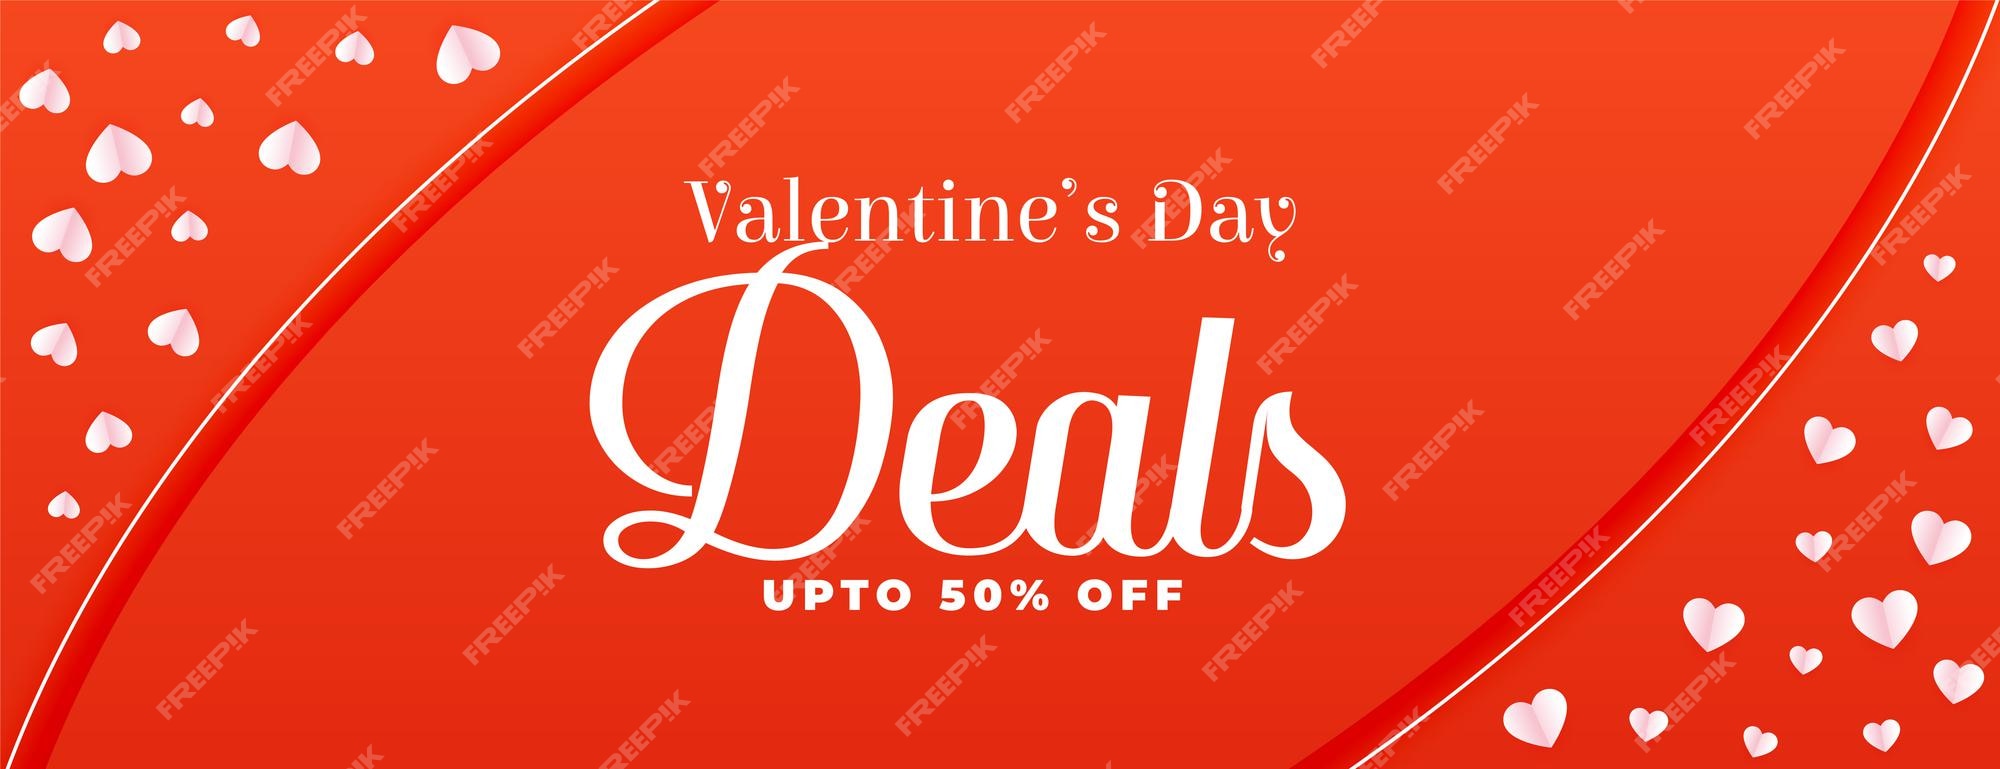 Free Vector Red valentines day deals banner with hearts decoration